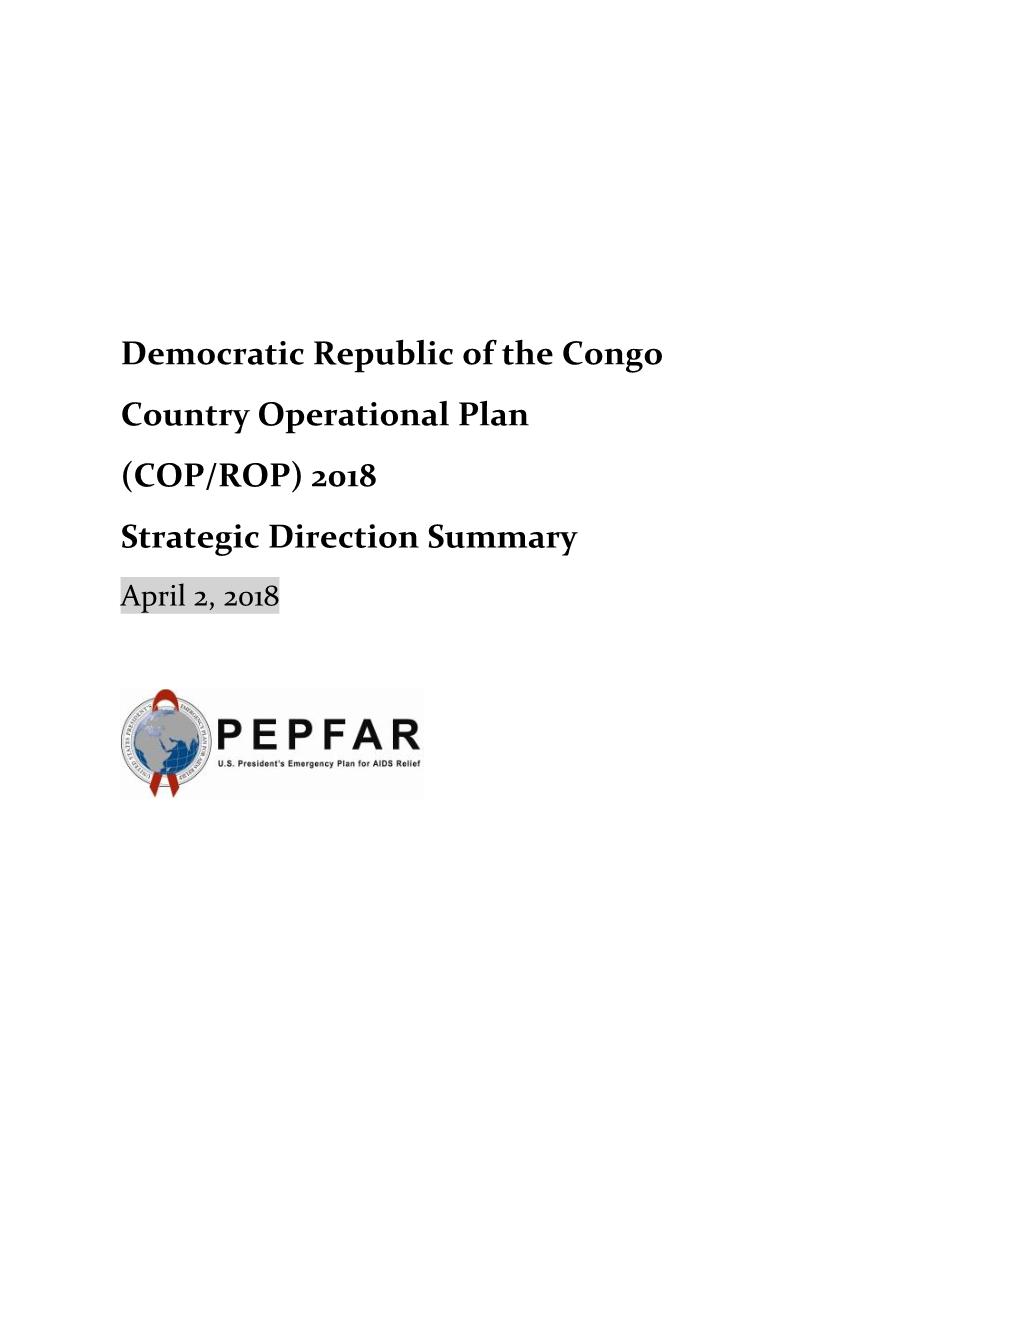 Democratic Republic of the Congo Country Operational Plan (COP/ROP) 2018 Strategic Direction Summary April 2, 2018